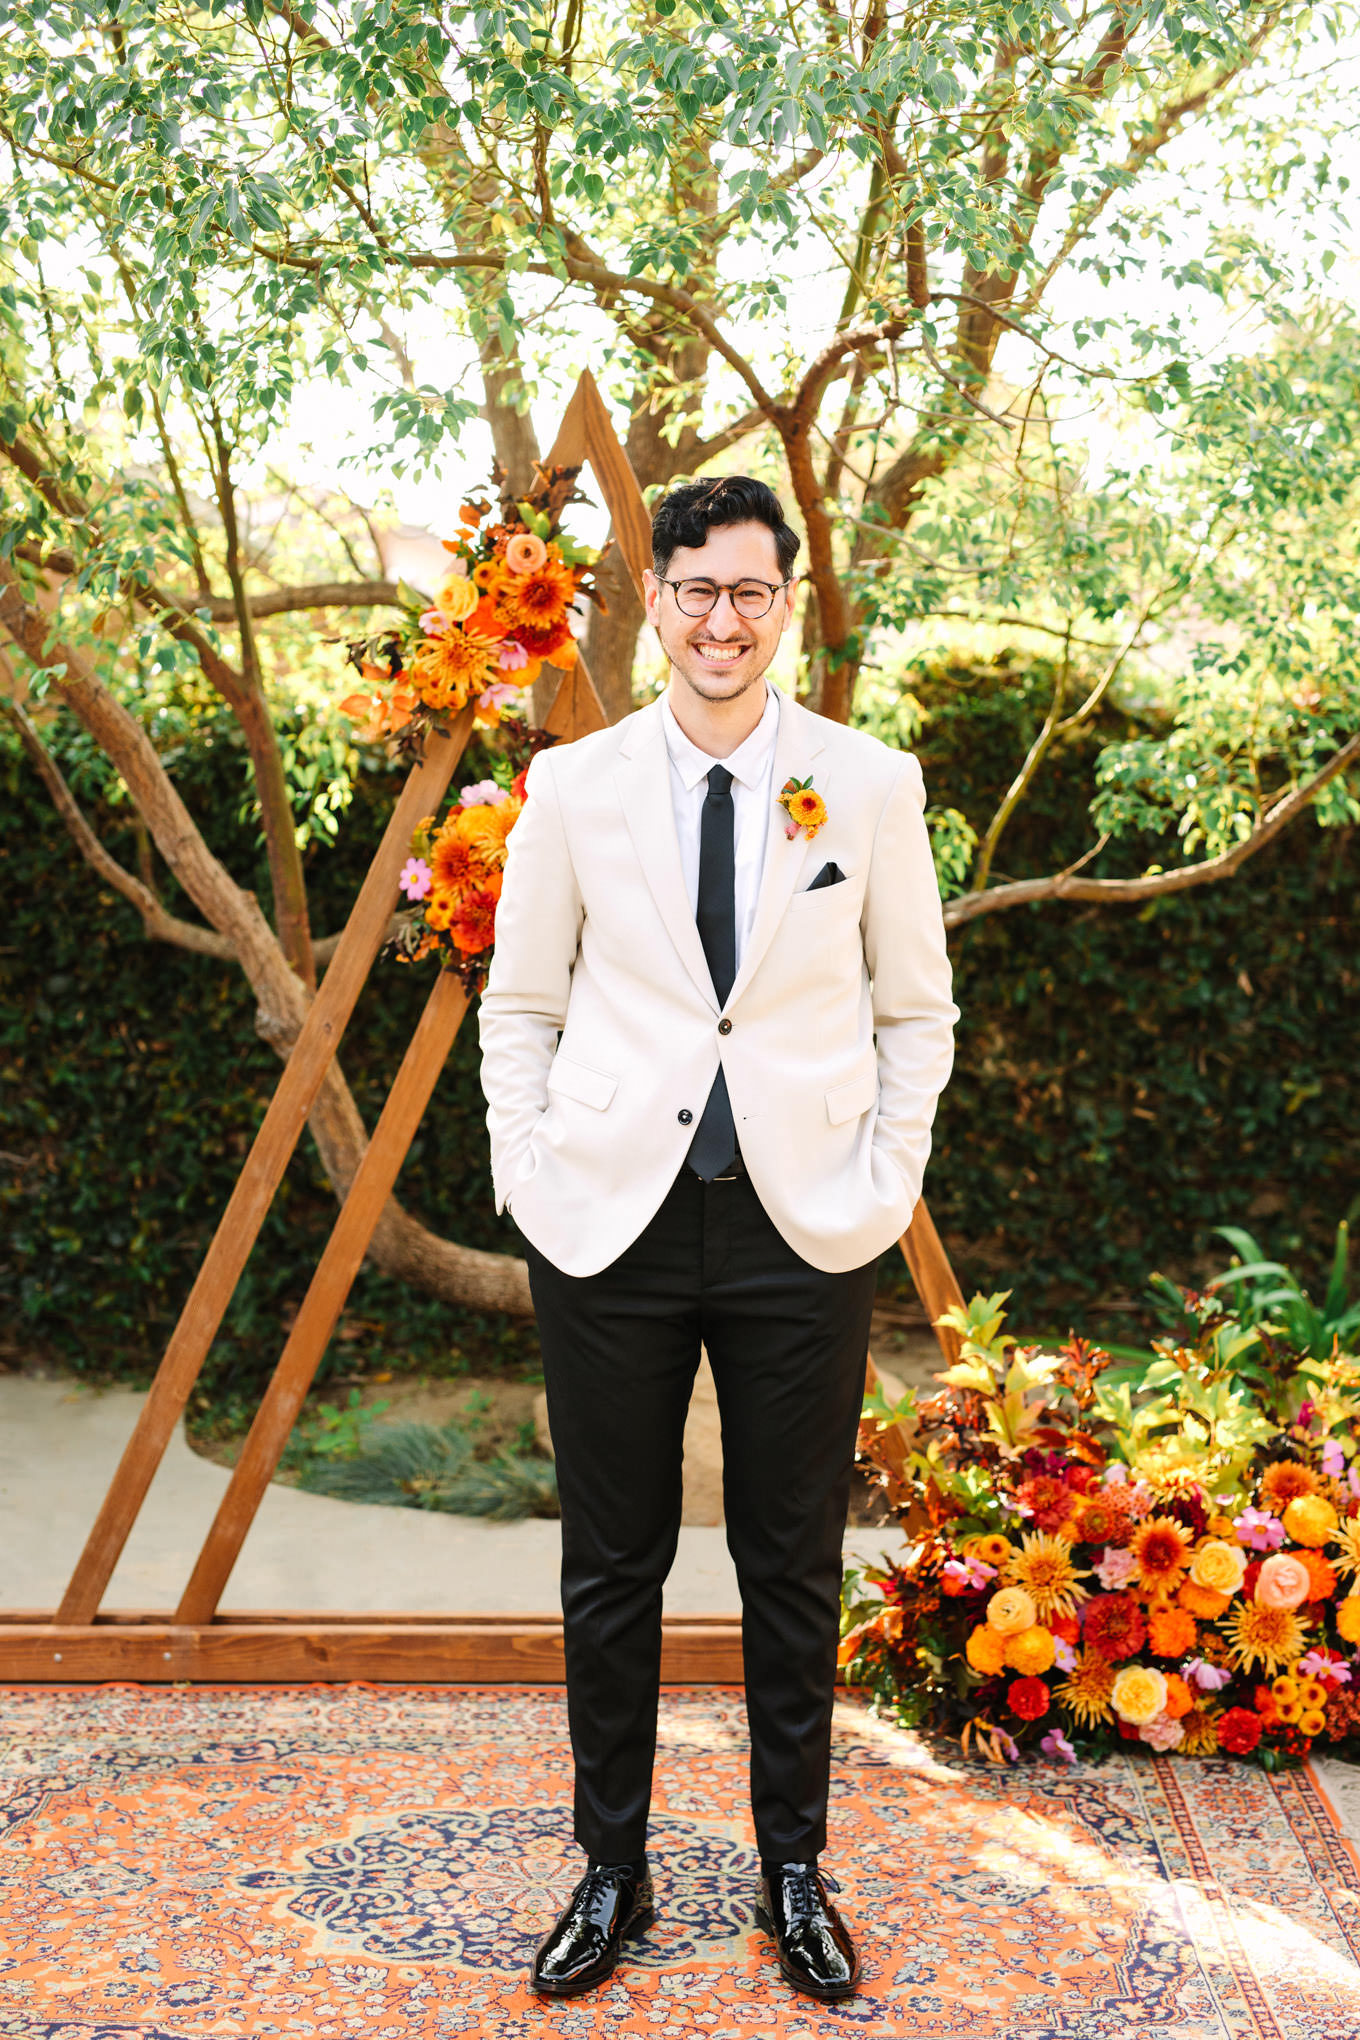 Groom portrait in front of unique wedding backdrop | Vibrant backyard micro wedding featured on Green Wedding Shoes | Colorful LA wedding photography | #losangeleswedding #backyardwedding #microwedding #laweddingphotographer Source: Mary Costa Photography | Los Angeles